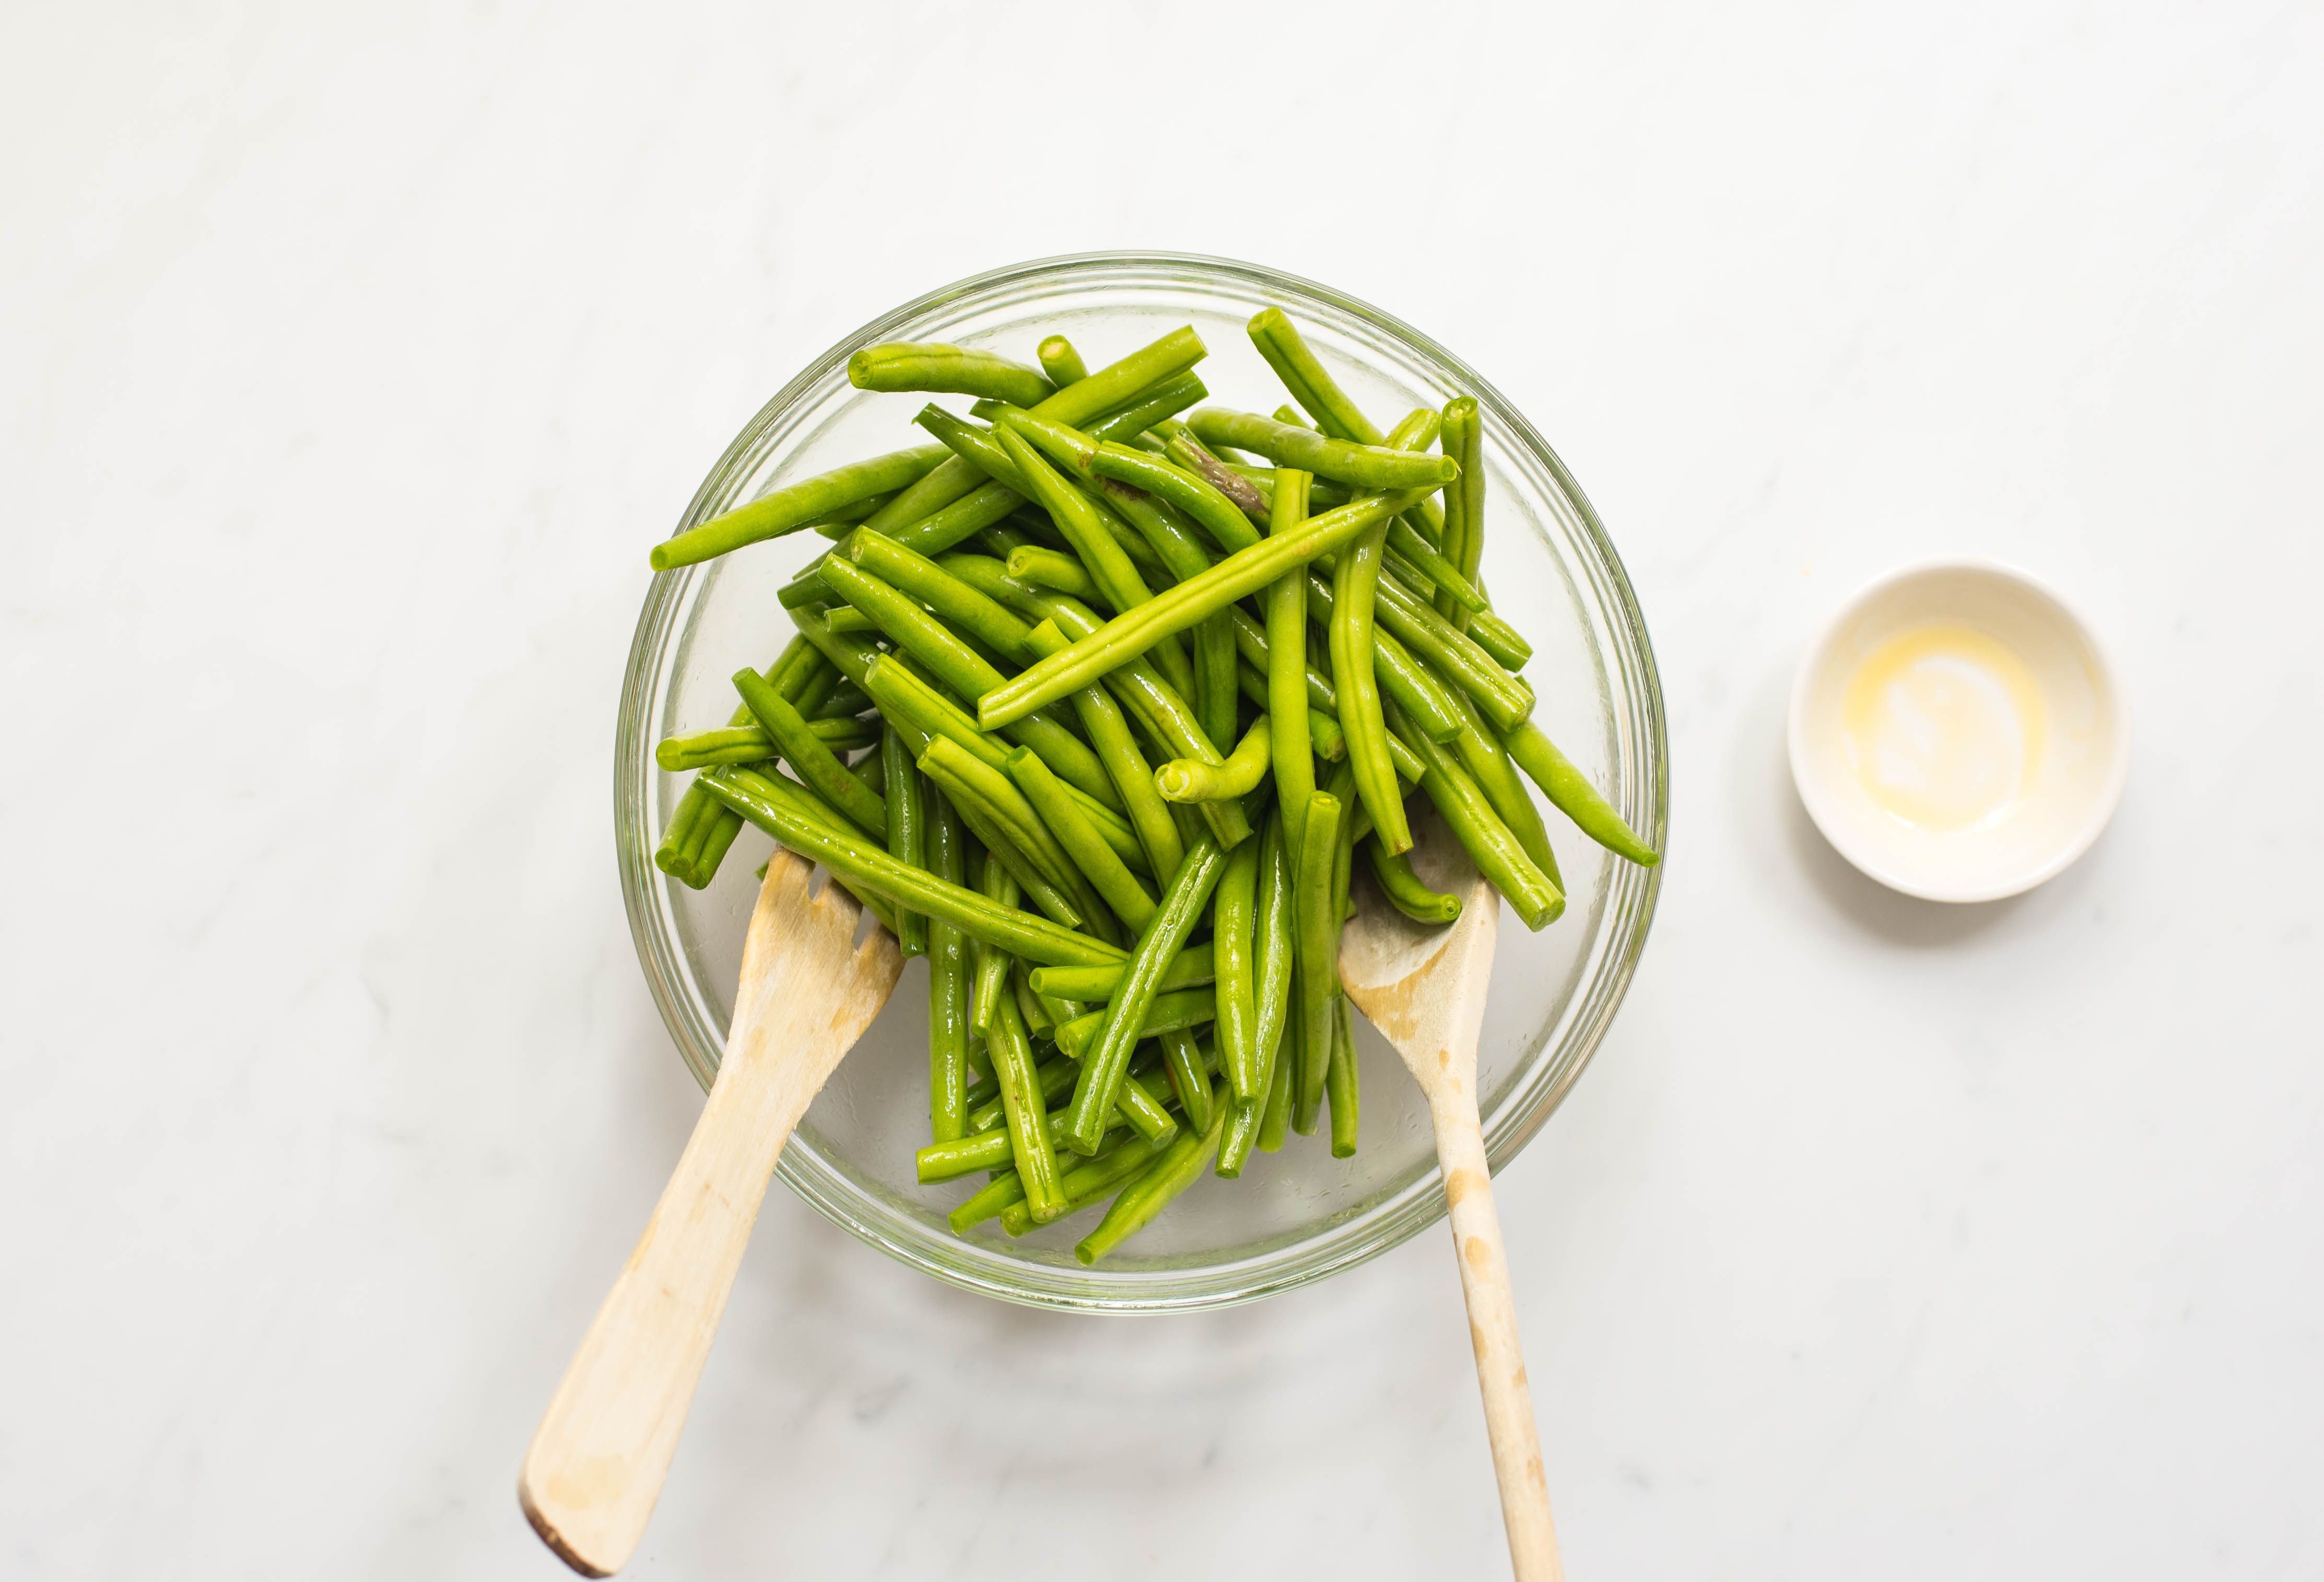 Roasted Green Beans,Etiquette Rules For Zoom Meetings